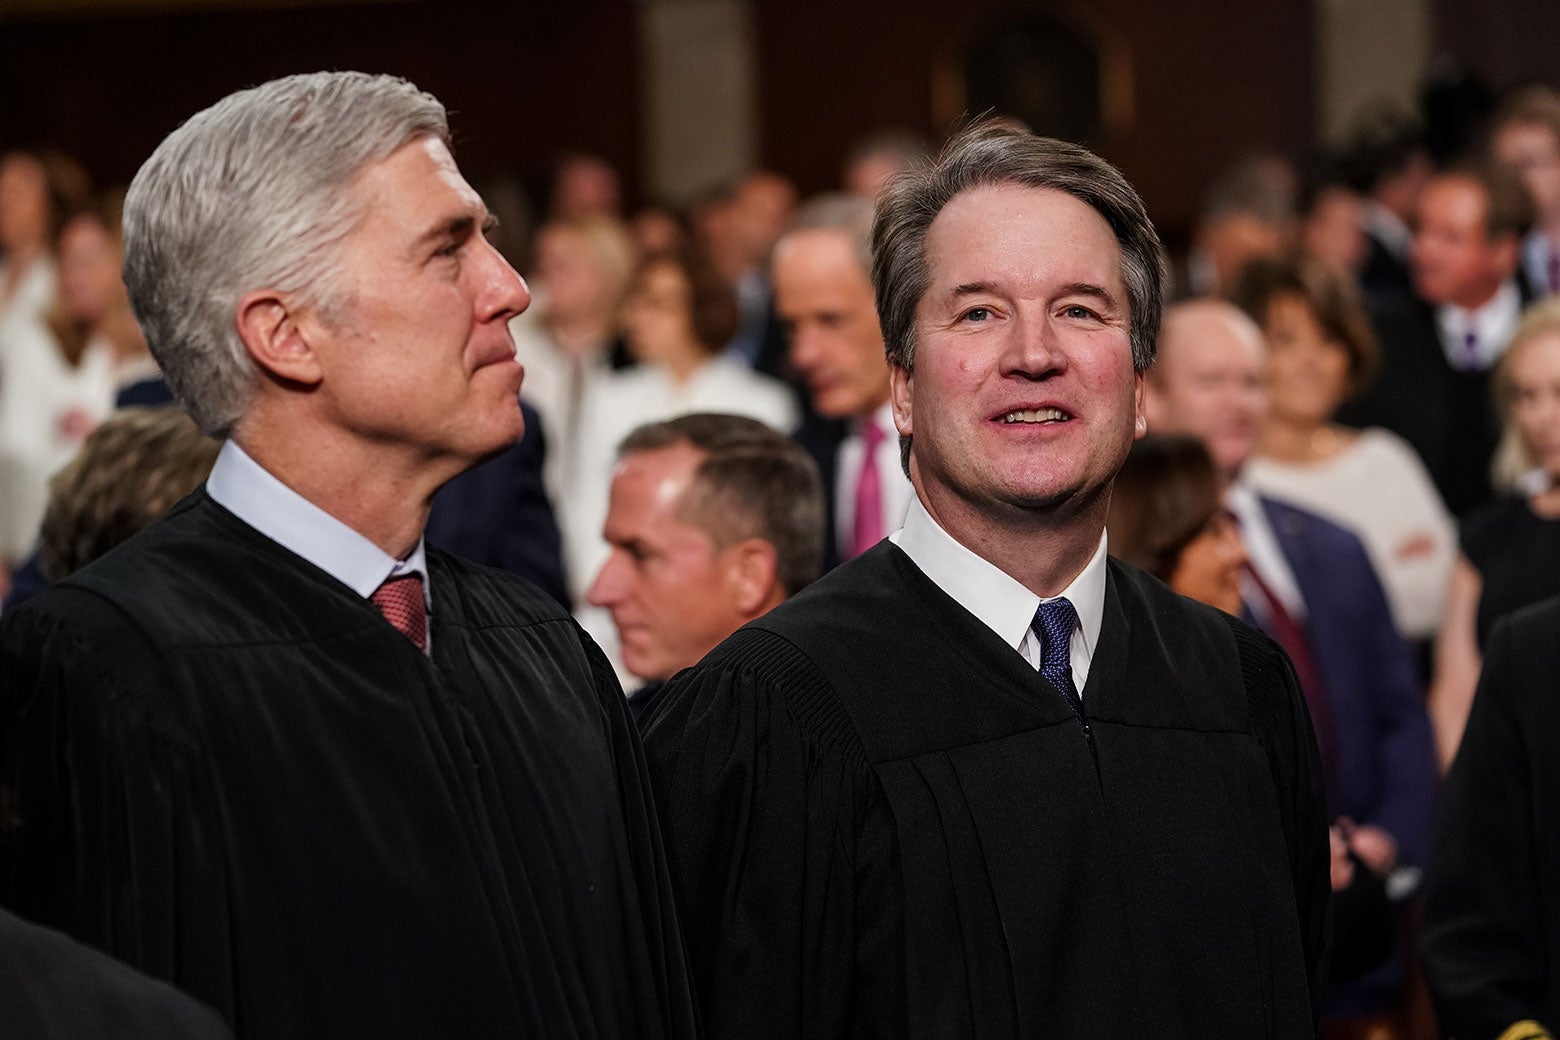 Supreme Court Justices Neil Gorsuch and Brett Kavanaugh attend the State of the Union address on Feb. 5 in Washington.